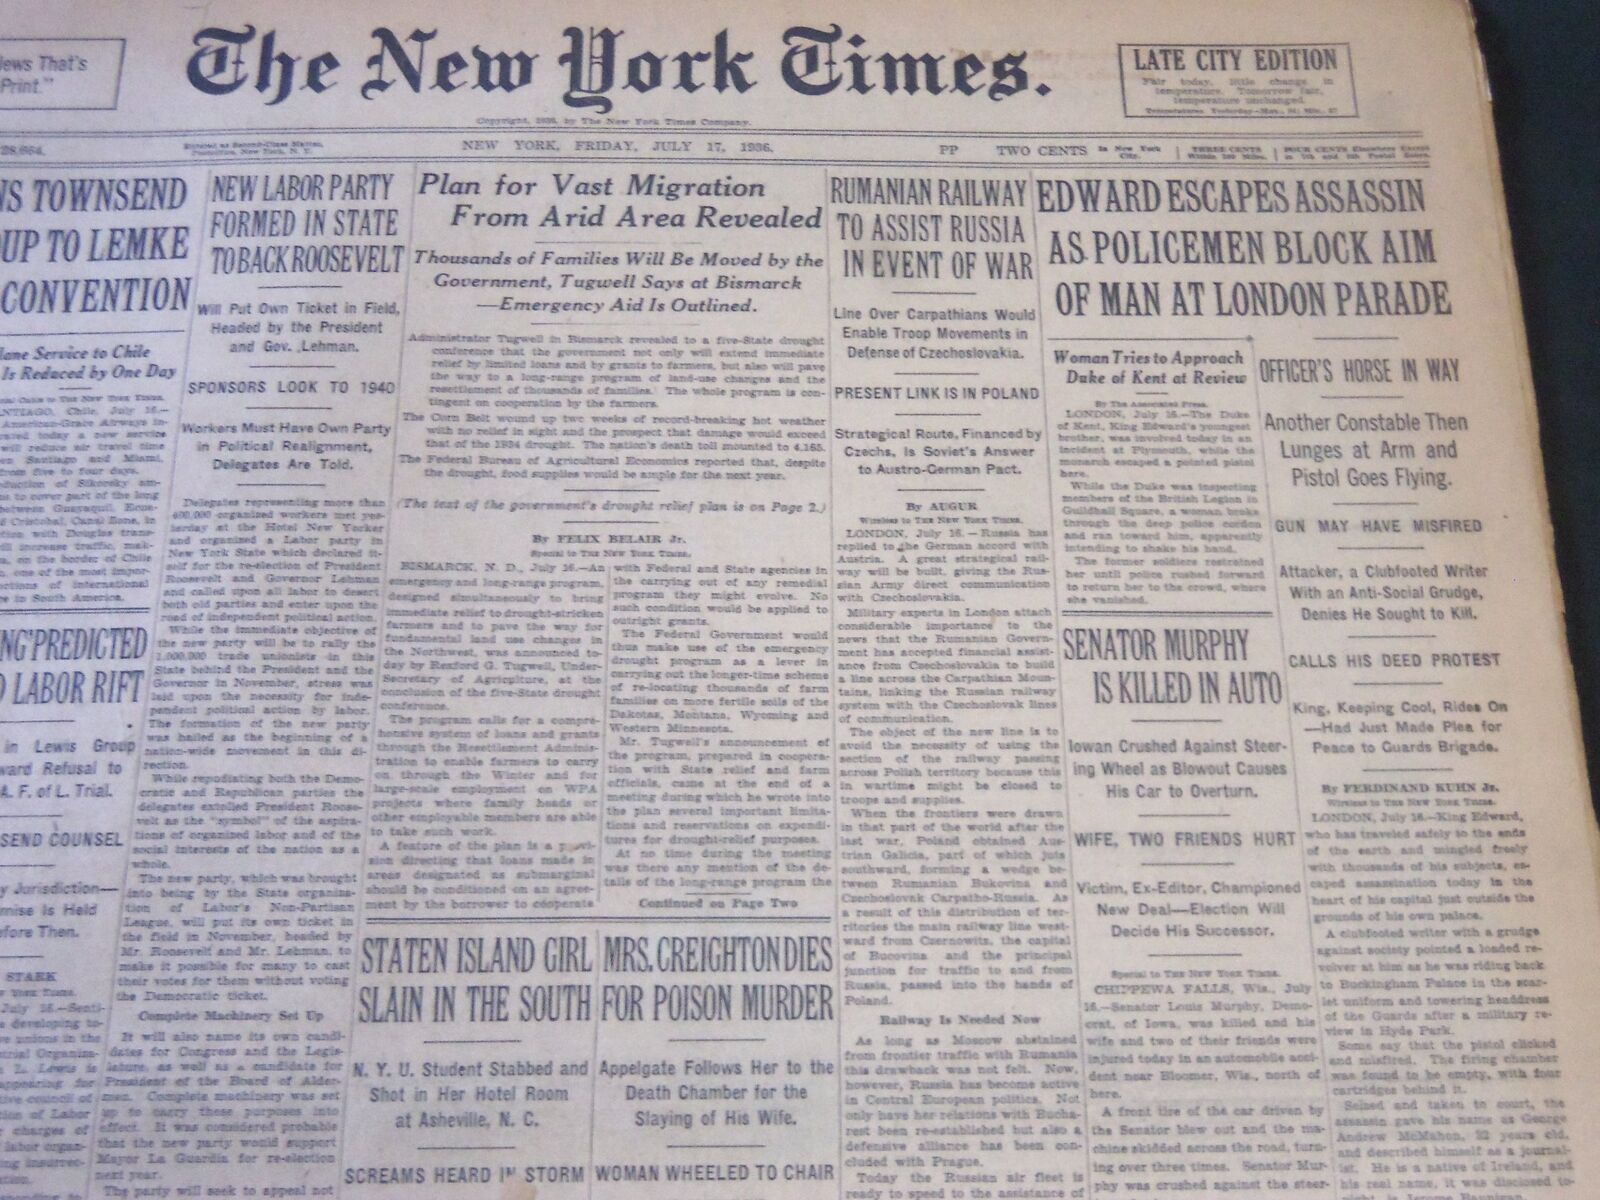 1936 JULY 17 NEW YORK TIMES - EDWARD ESCAPES ASSASSIN - NT 6724